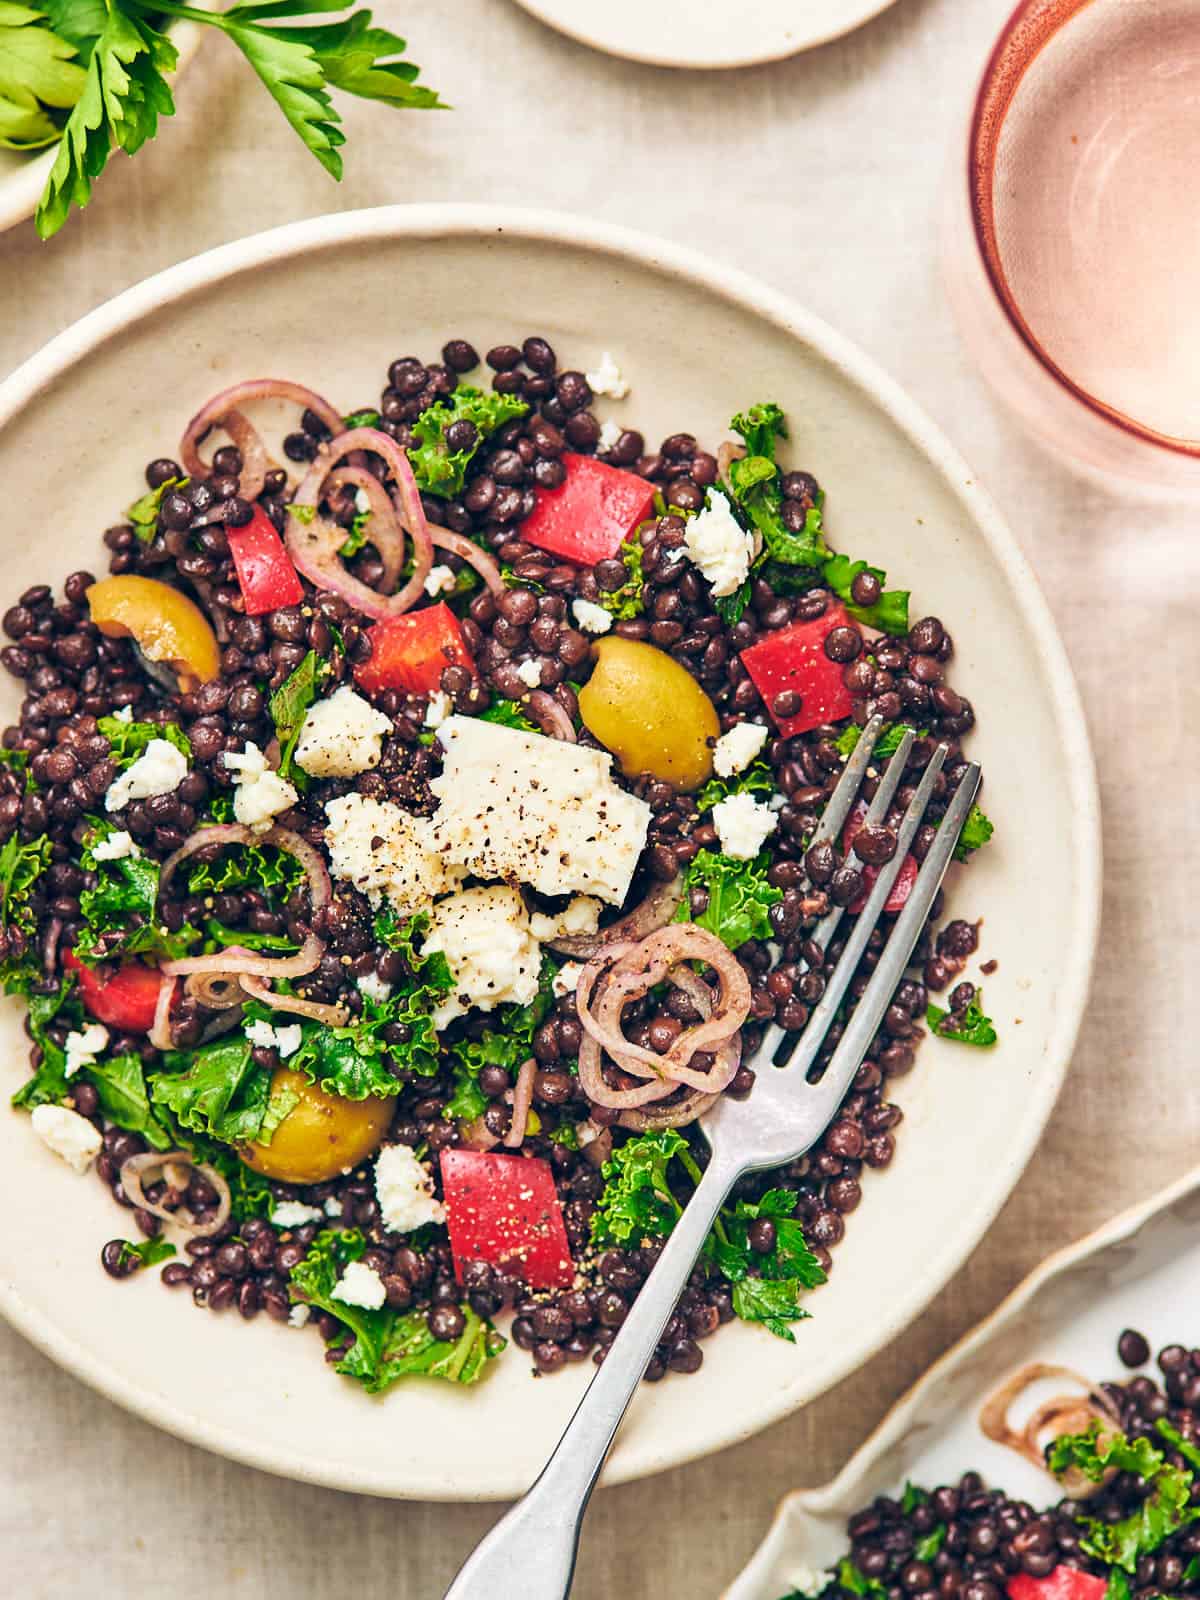 Overhead view of black lentil salad with feta and kale placed on a white plate with a fork.